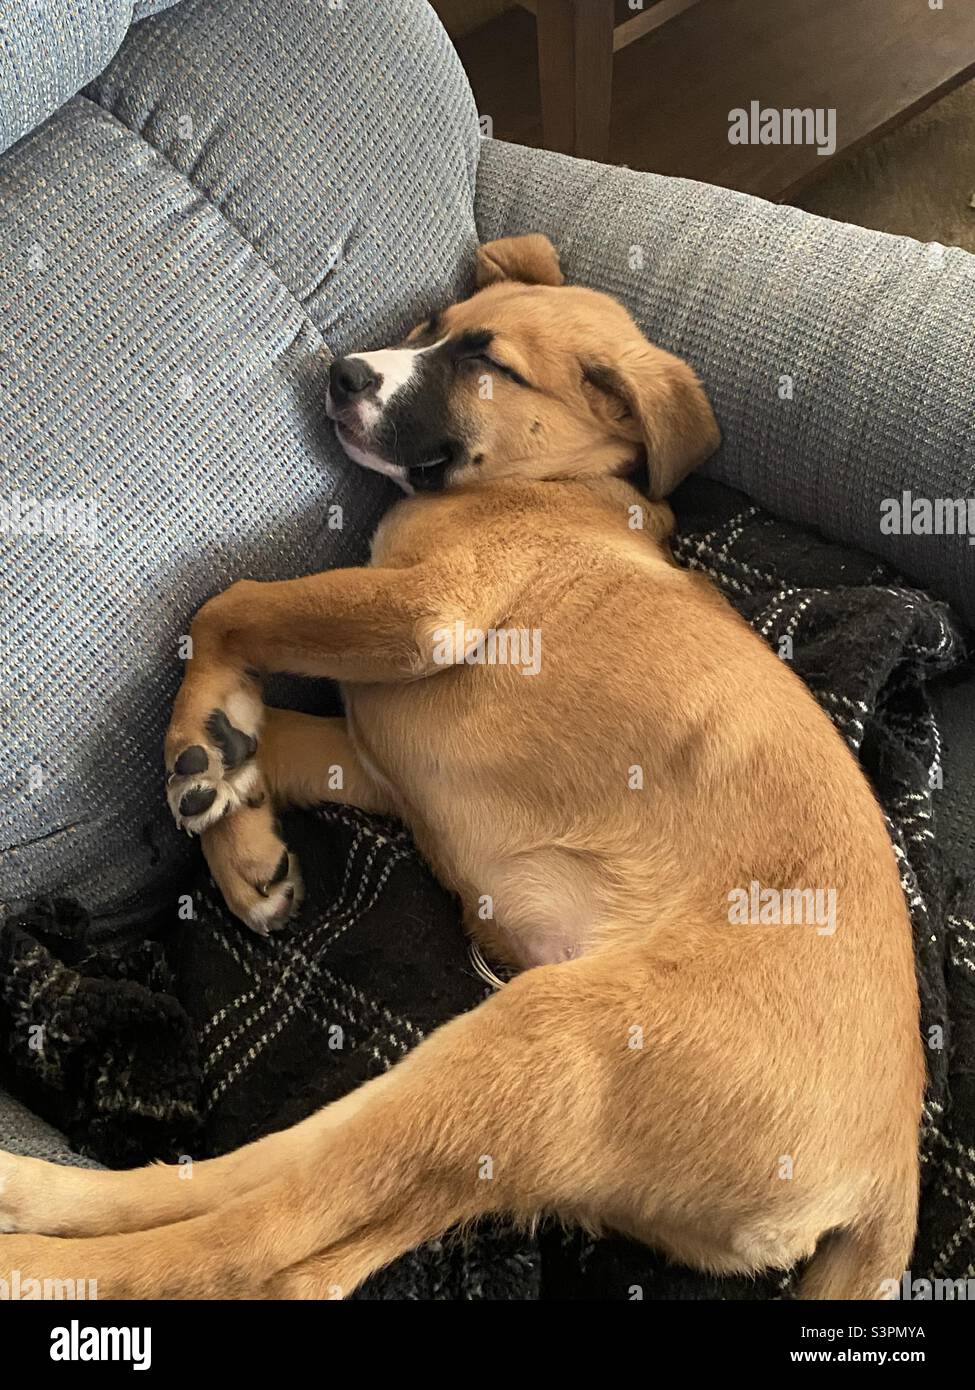 Snoozing puppy Stock Photo